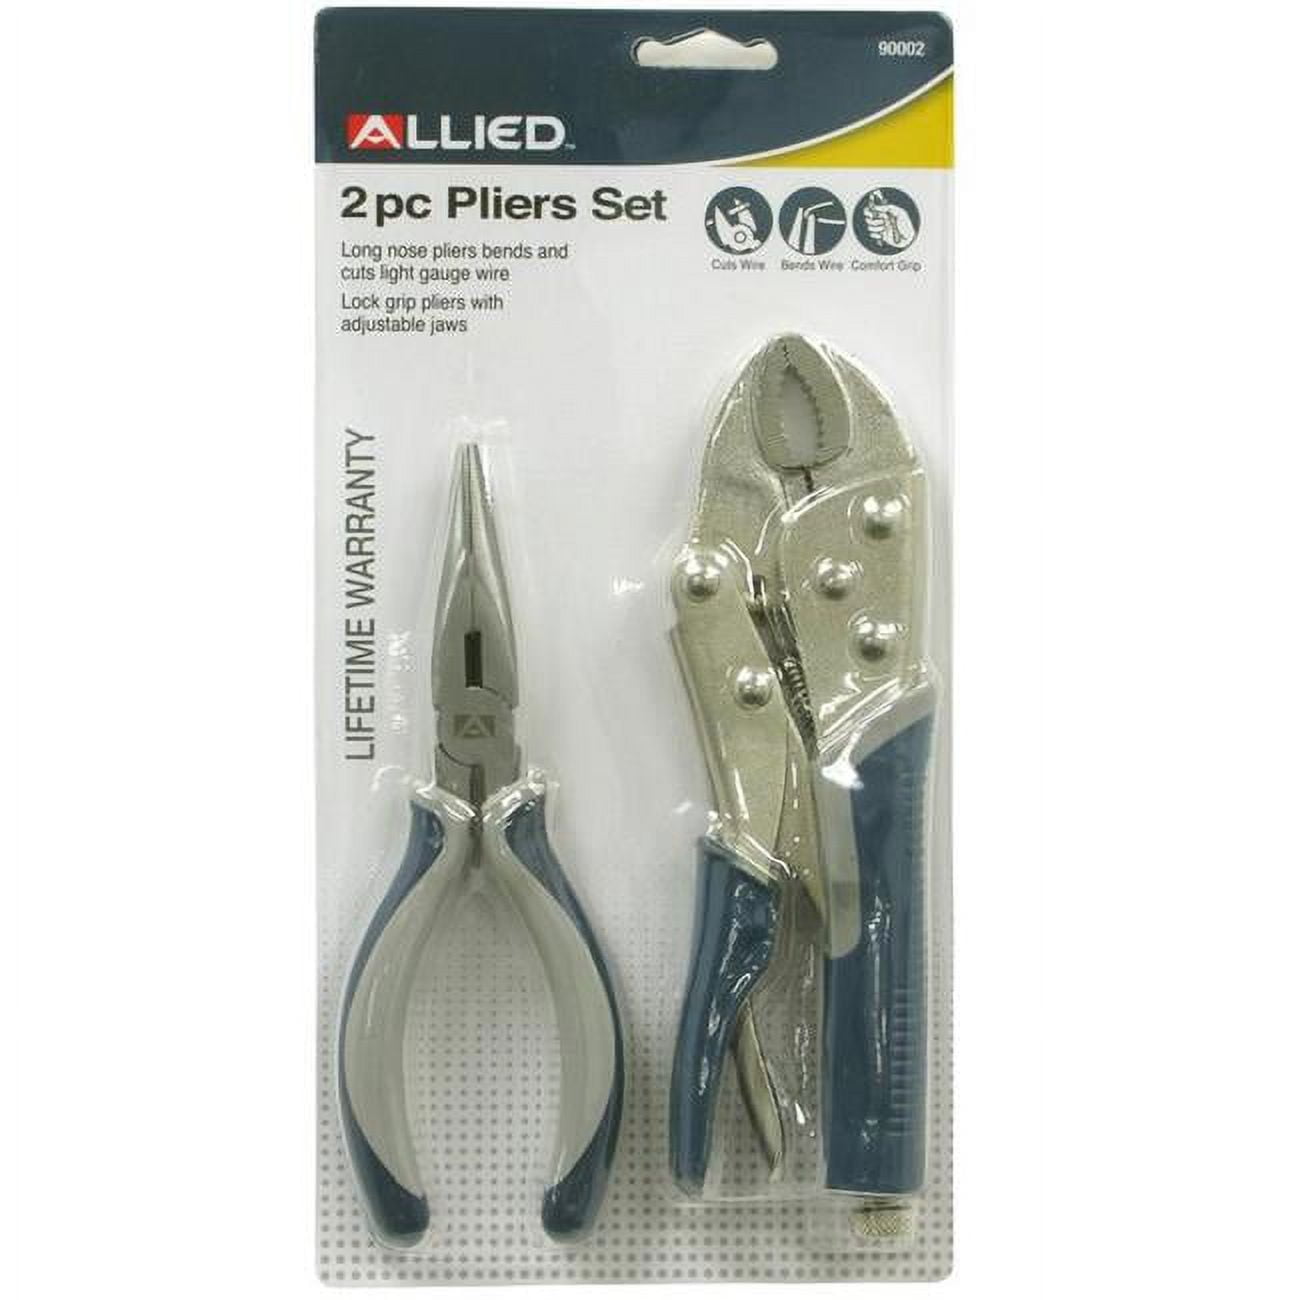 Picture of Allied 90002 Pliers Set - 2 Piece